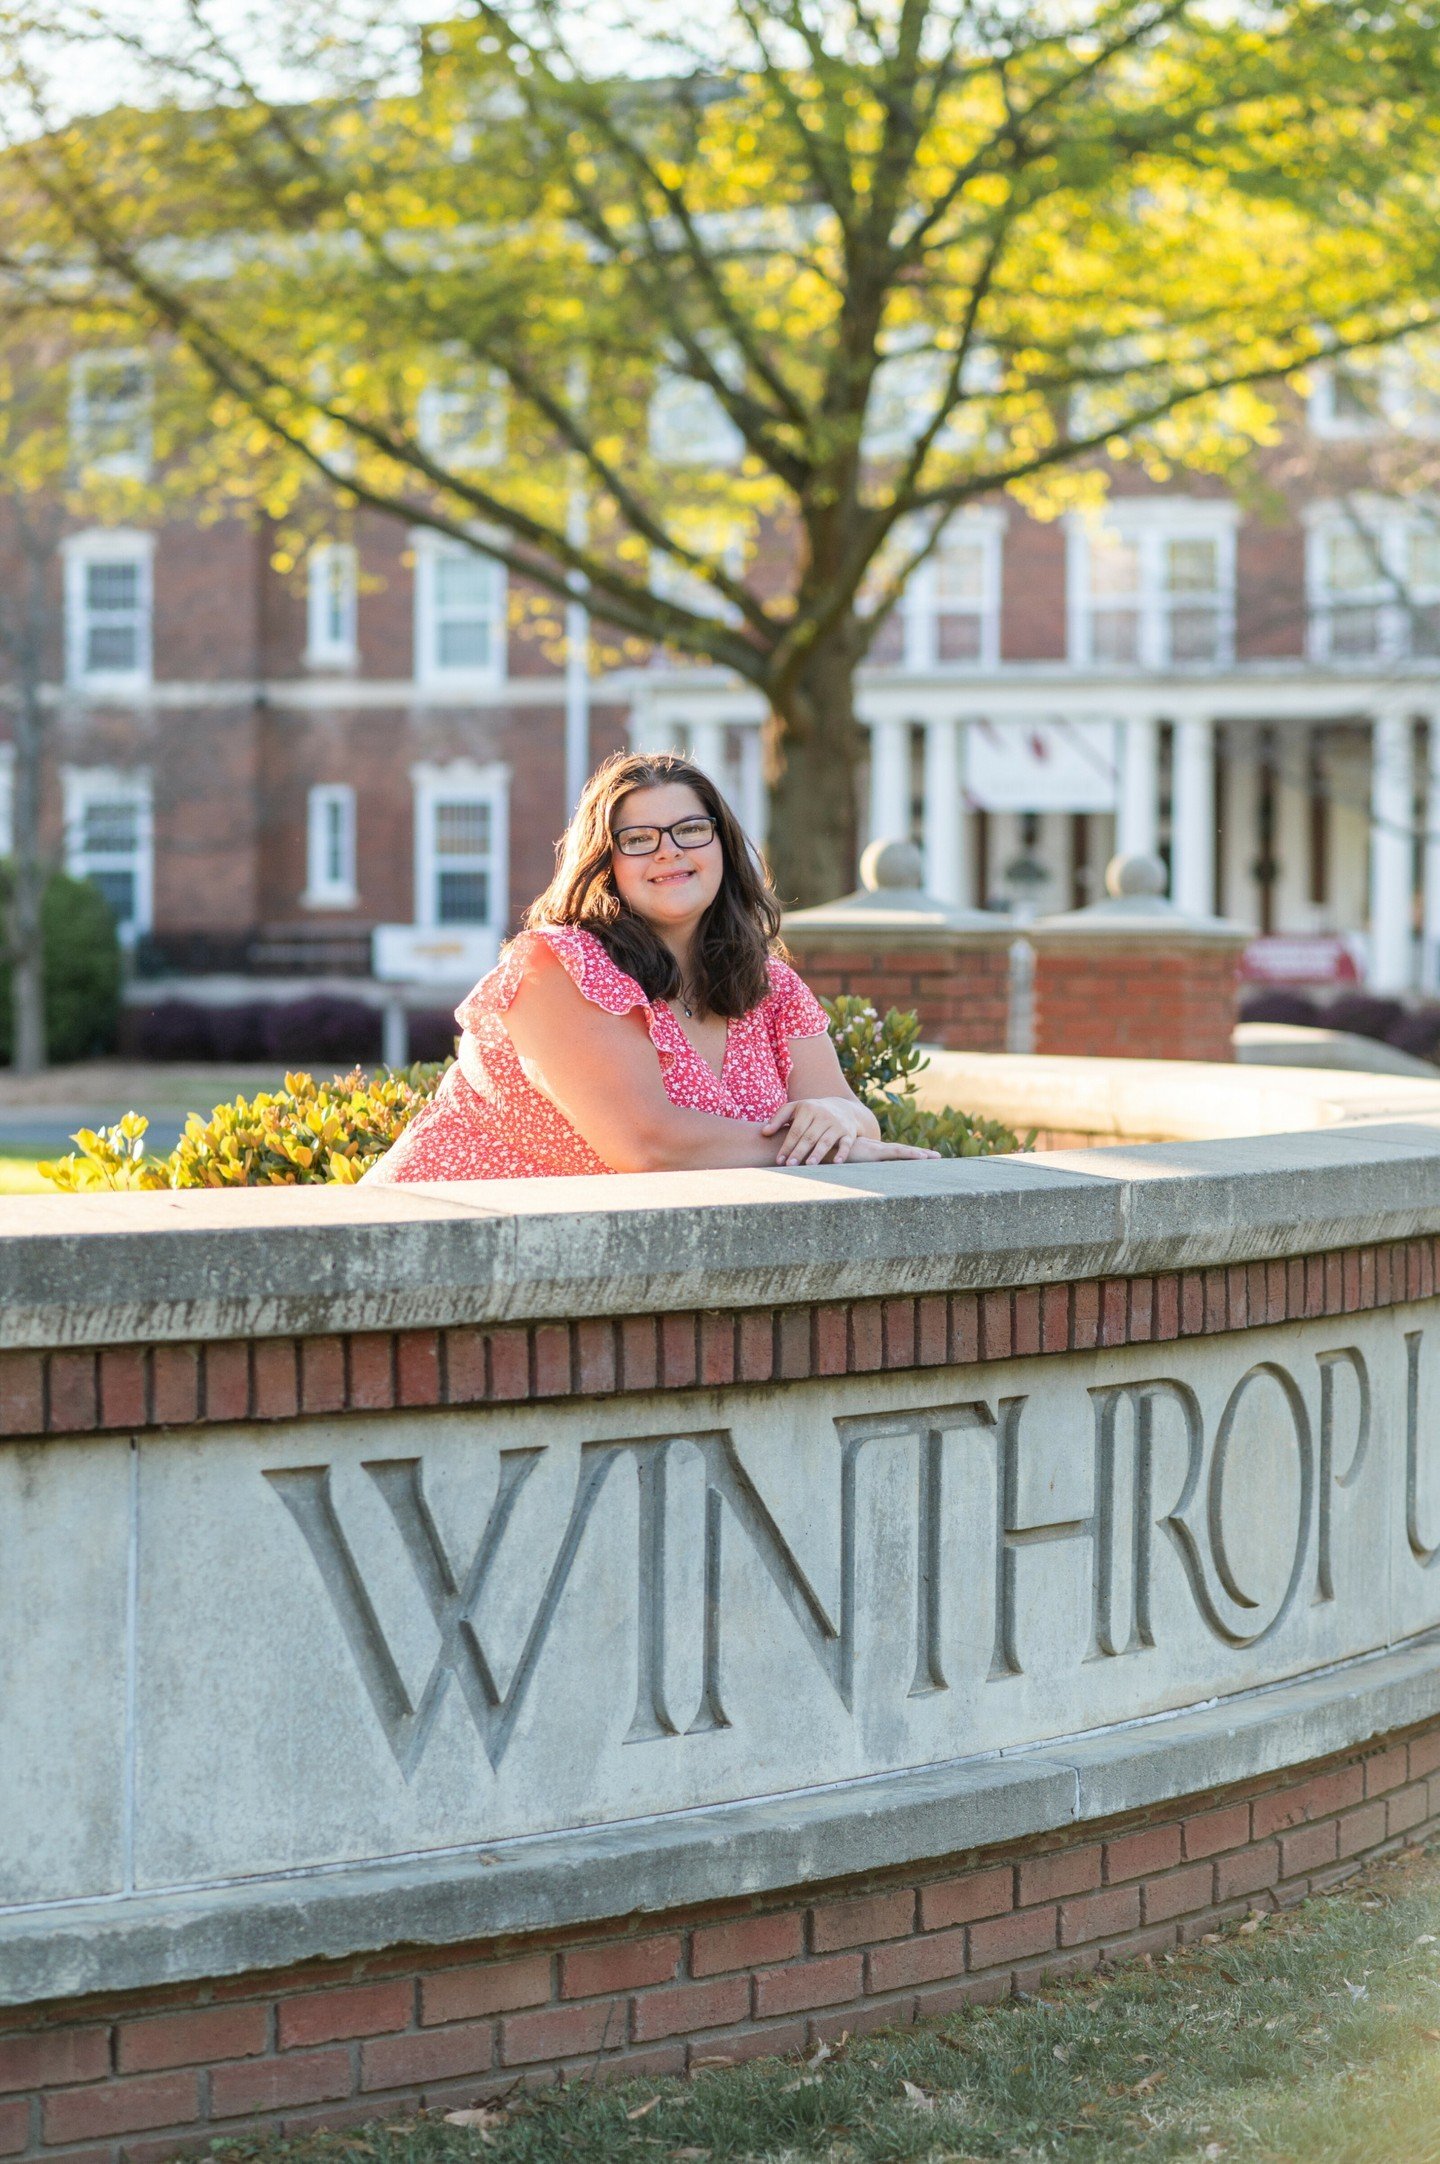 This girl walks the stage this afternoon and graduates from Winthrop University!  Congratulations, Chelsea!
*
*
*
*
*
#kimberlycaublephotography #seniorsession #seniorportraits #collegesenior #seniorpictures #seniorphotographer #seniorphotos 
#winthr